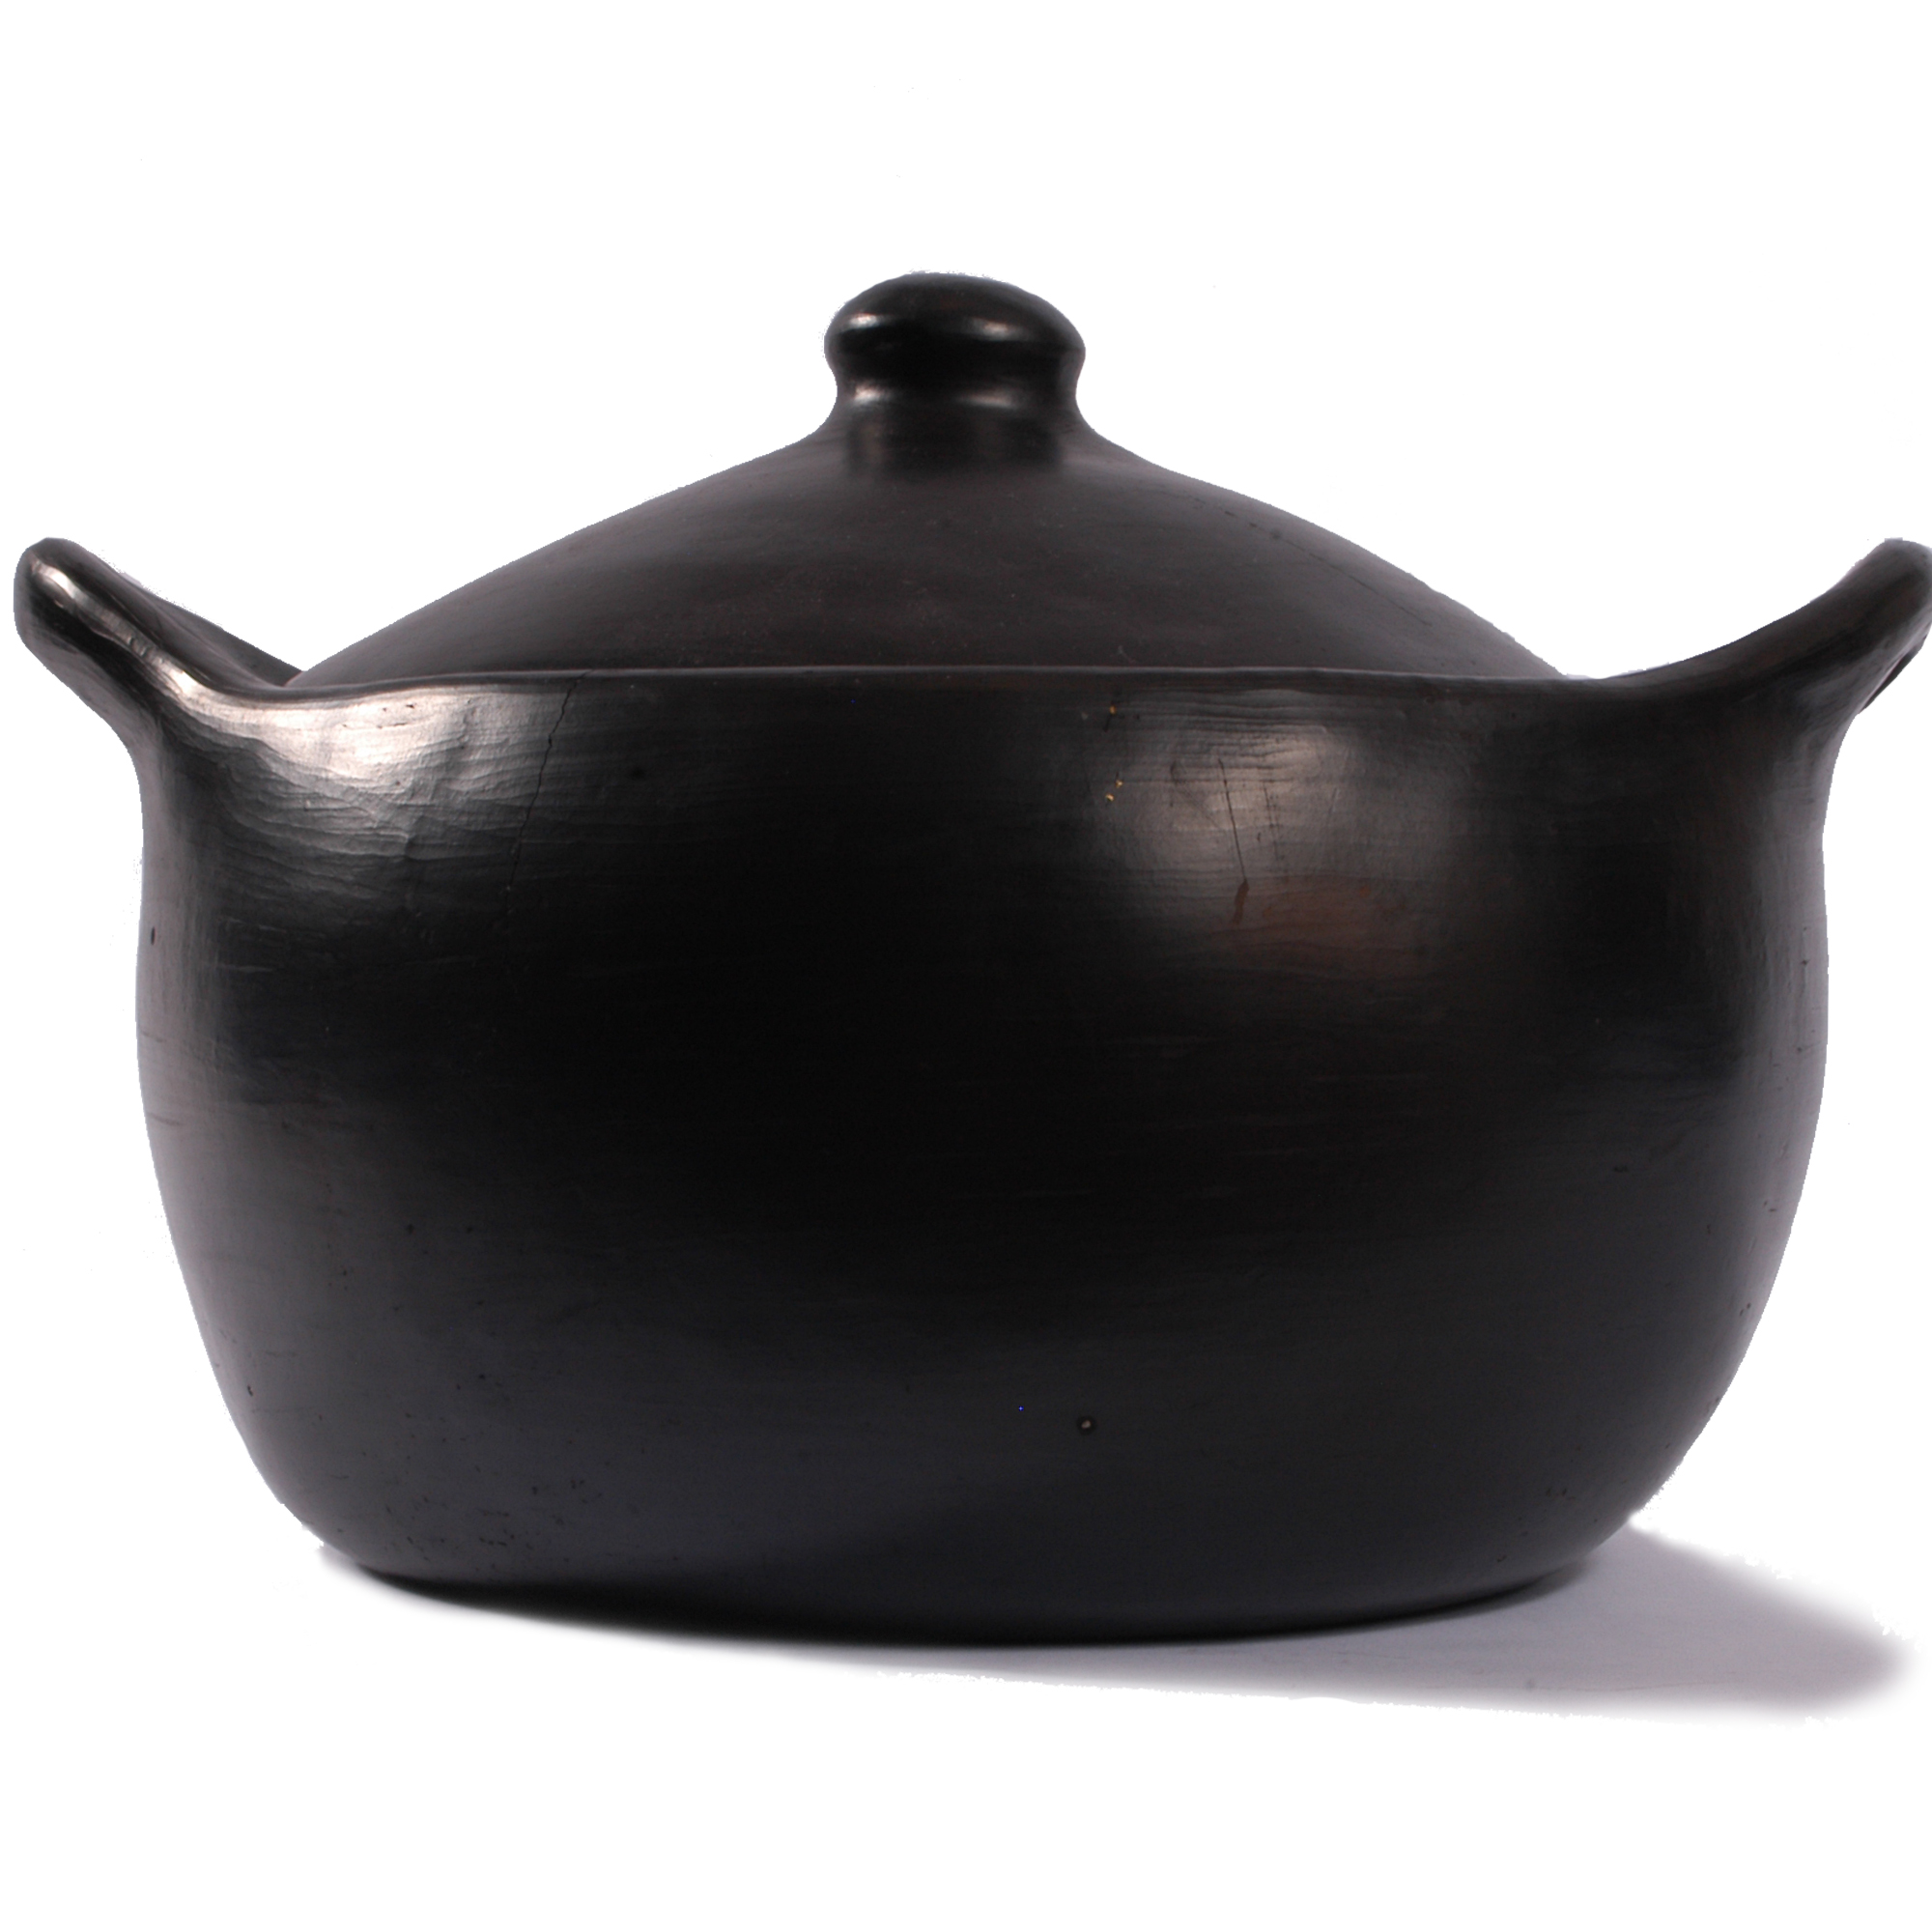 https://ancientcookware.com/images/stories/virtuemart/product/col_1018_15_1_large3.jpg